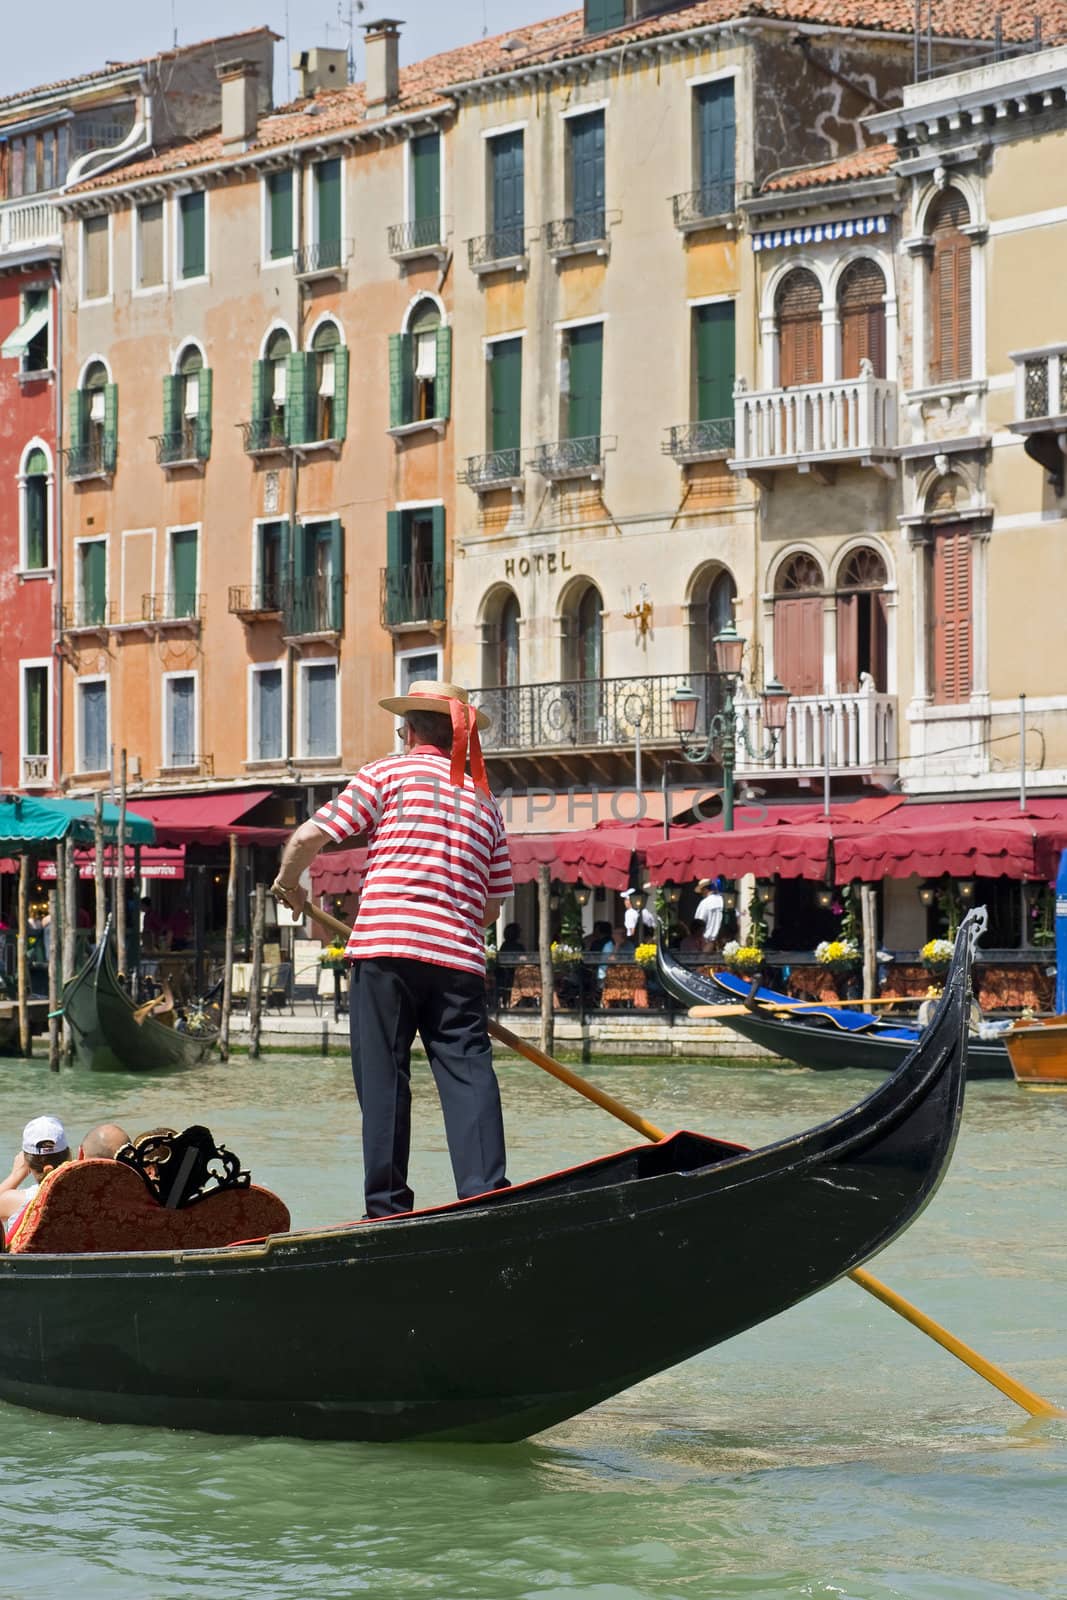 Gondola in the Grand Canal of Venice, Italy by stockbymh